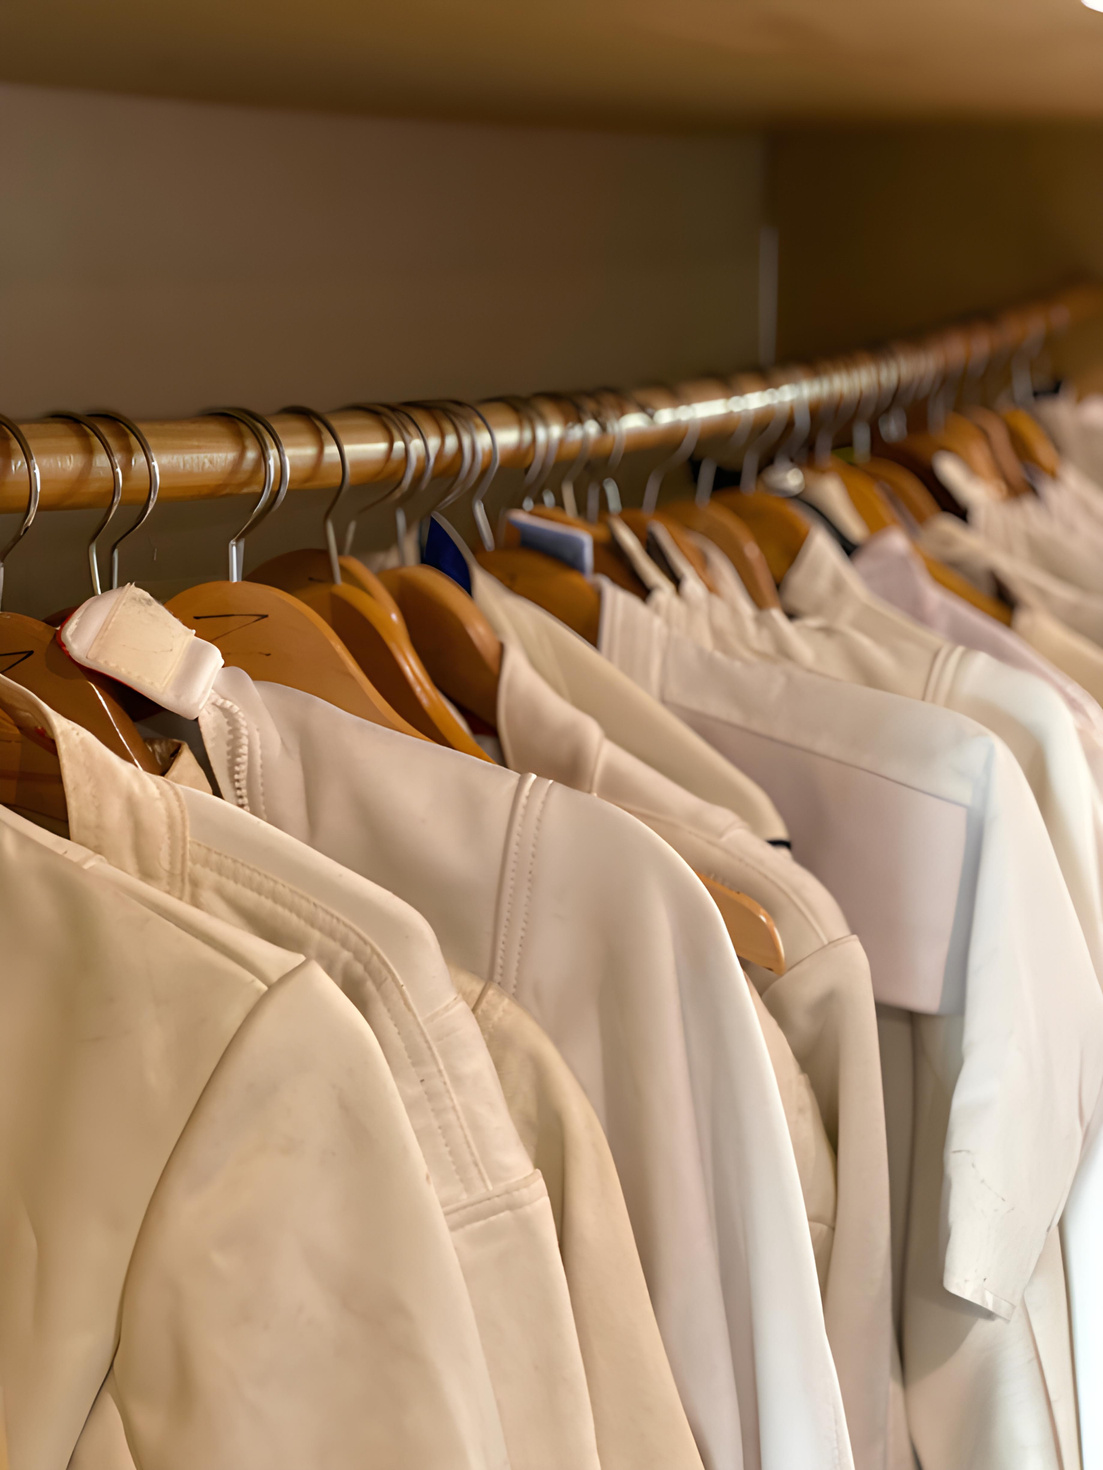 a row of white fencing jackets hanging on a coat rack at west coast fencing academy